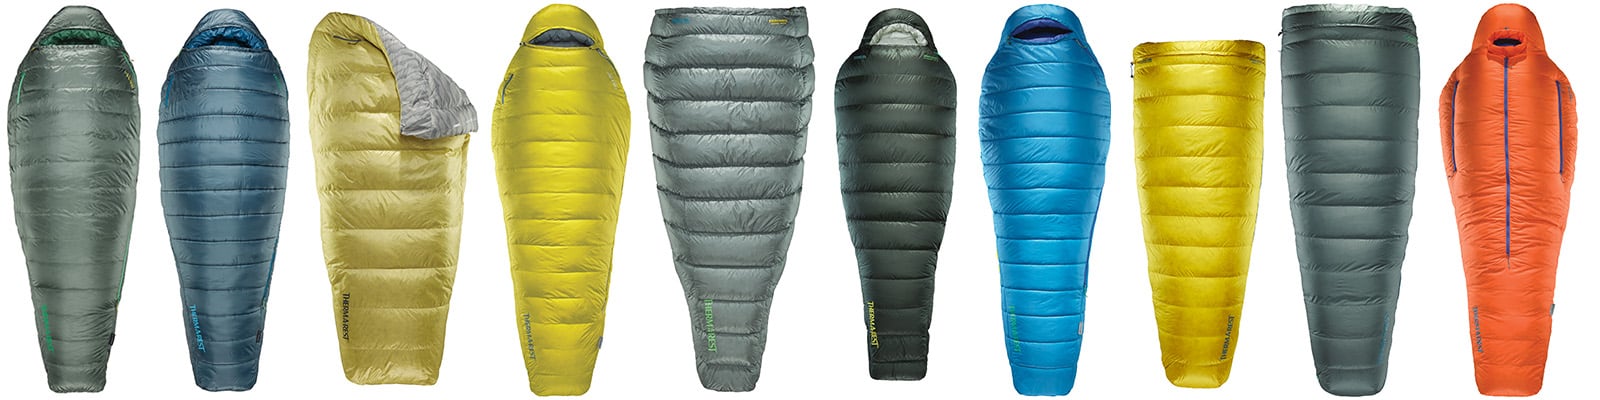 thermarest sleeping bags and quilts lineup